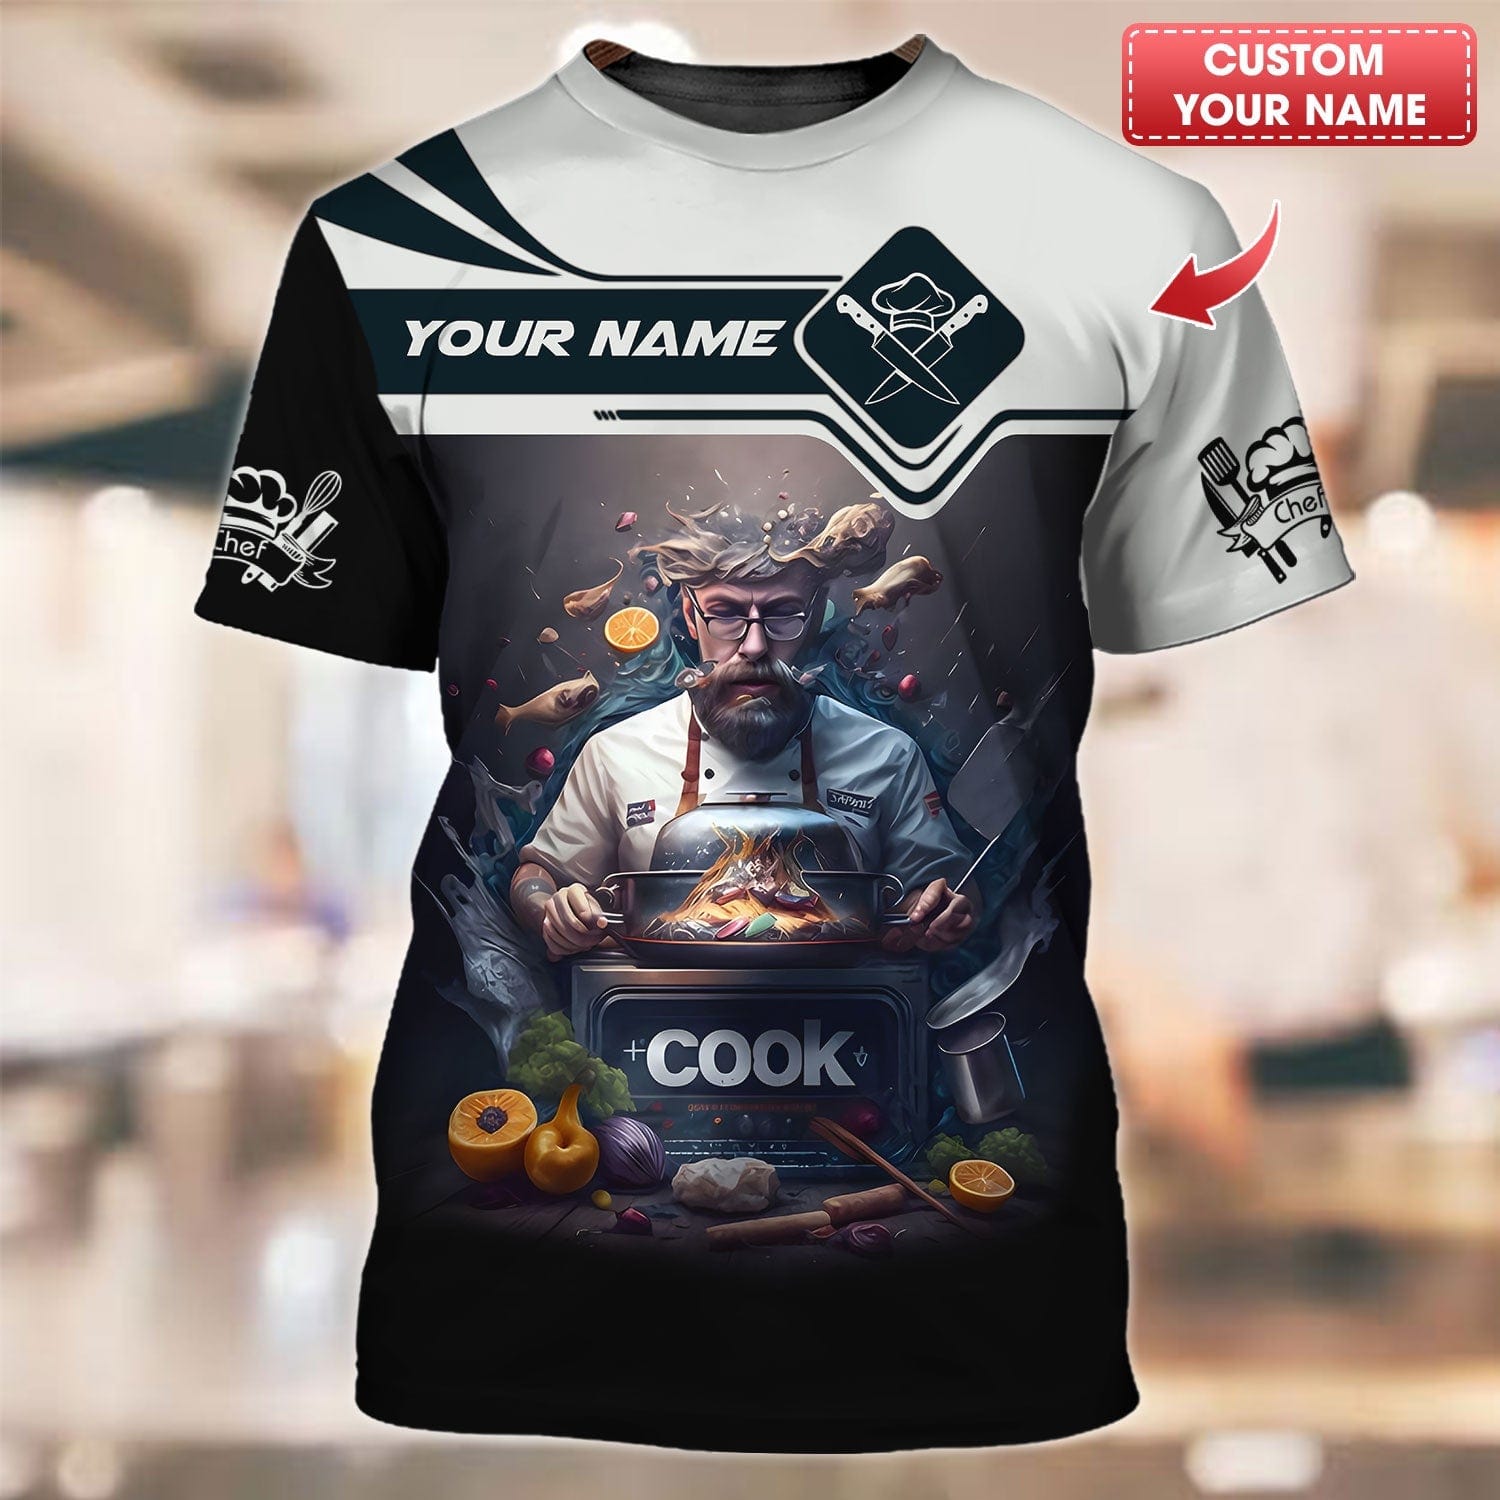 Personalized Chef Shirt - Expert Chef at Work with Lively Cooking Scene